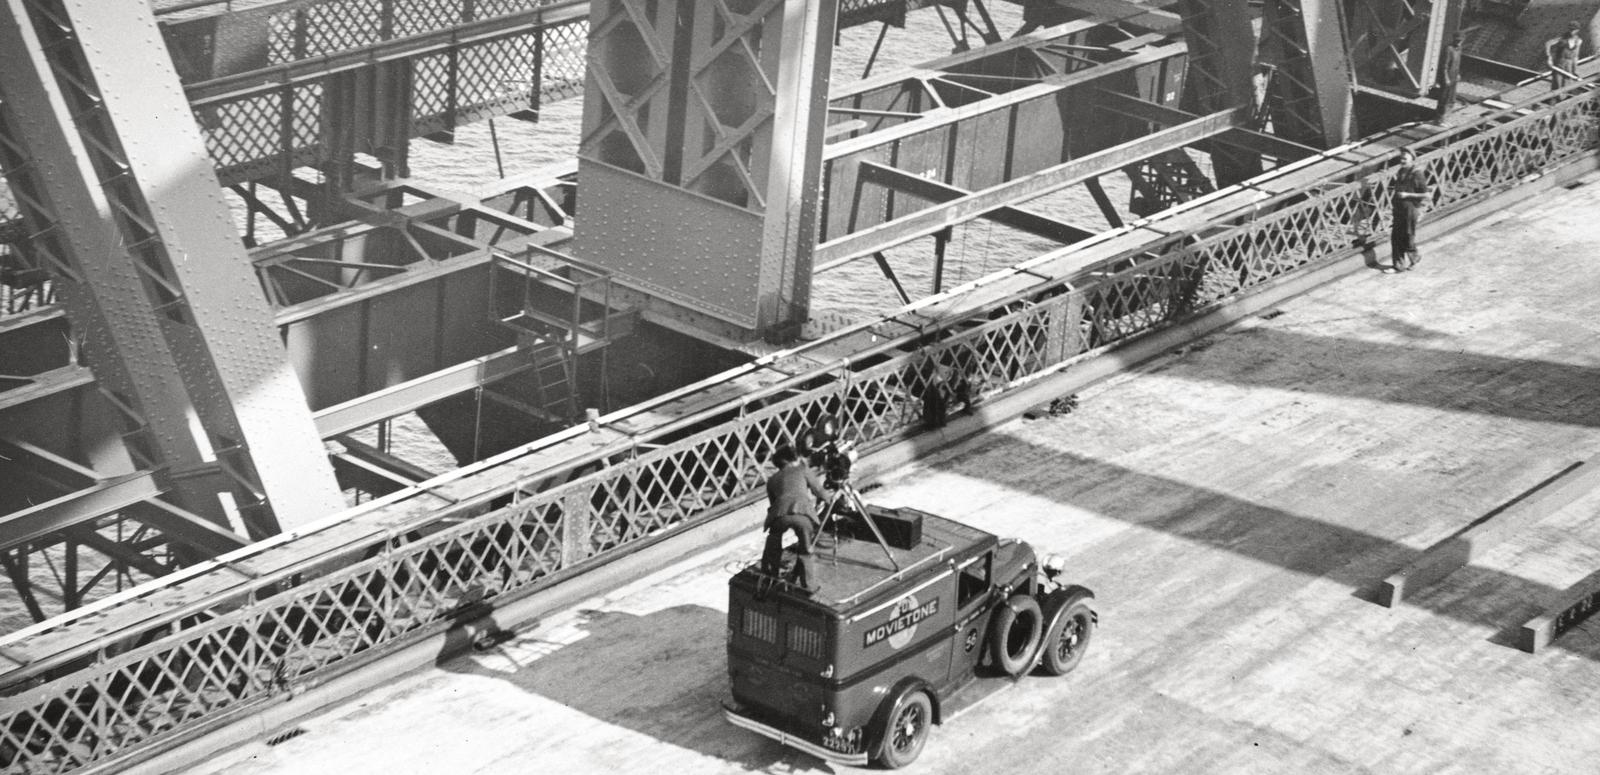 Fox Movietone Productions van with a man standing on top operating a camera. The van is on the deck of the newly-constructed Sydney Harbour Bridge.